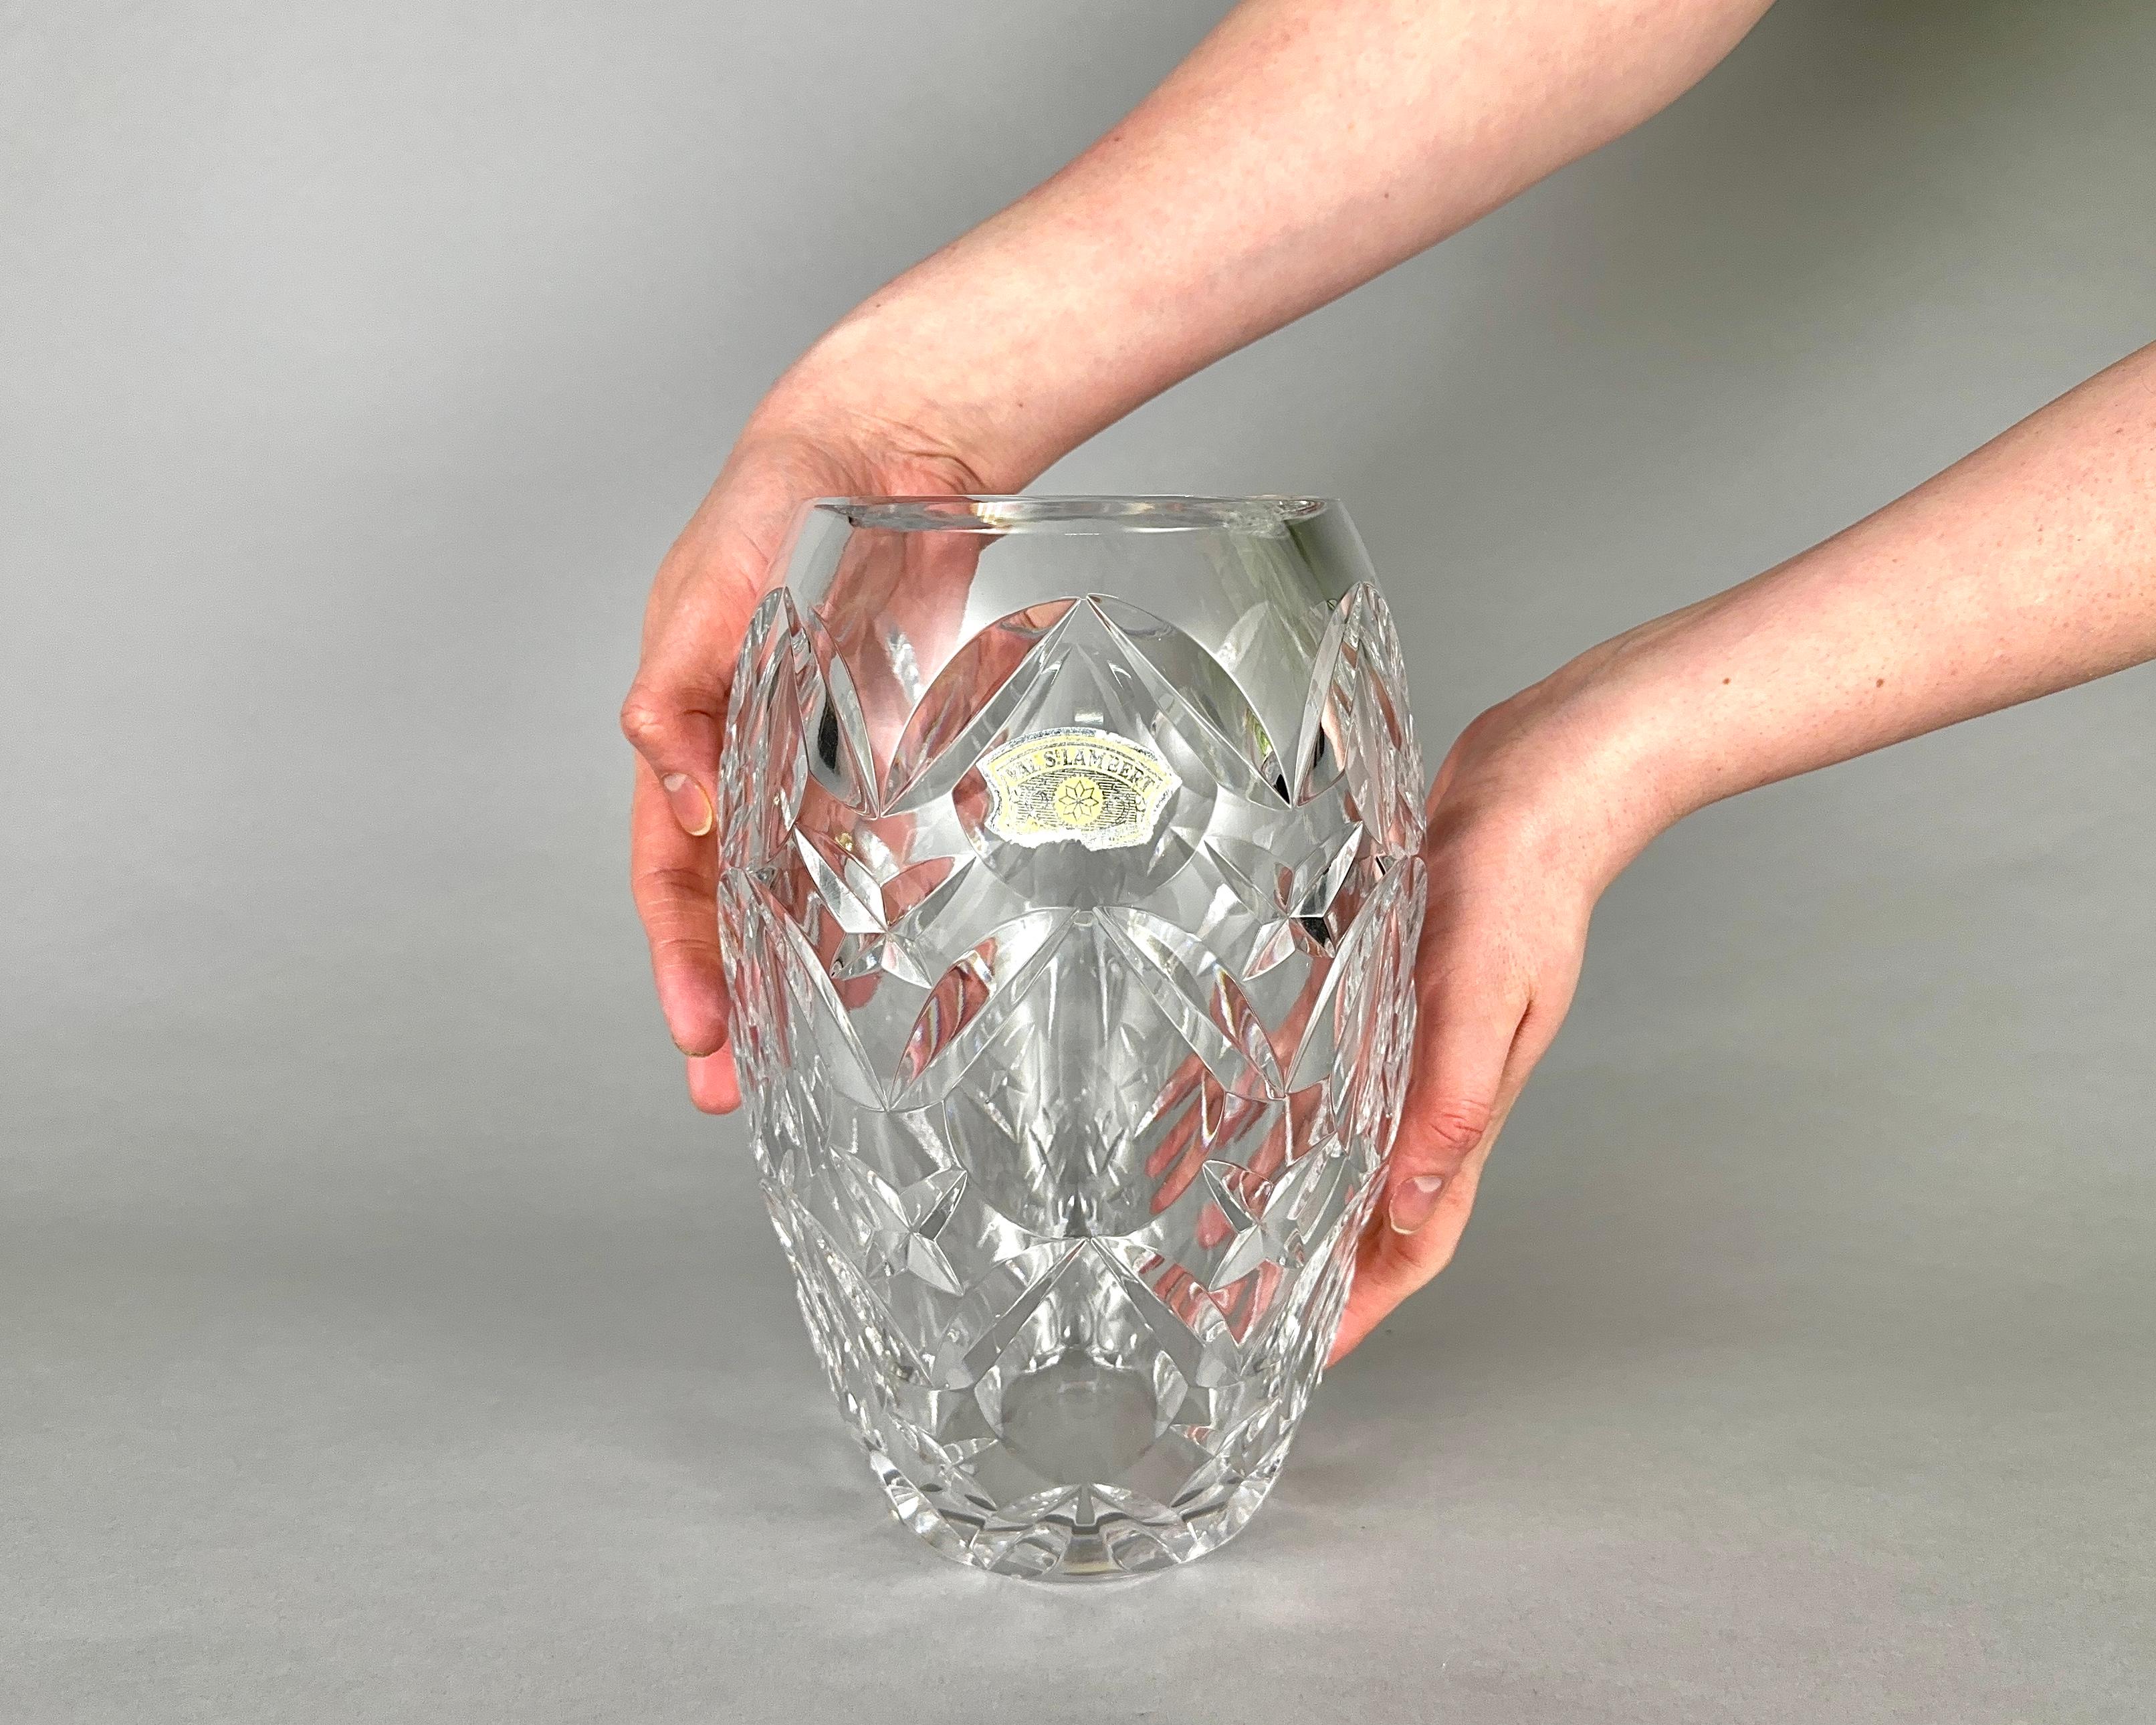 VAL SAINT LAMBERT Vase, Crystal, Belgian crystal glassware manufacturer, founded in 1826 and based in Serena, holds a Royal Warrant from King Albert II.

The vase is made of colorless faceted crystal and is made in the Art Deco style.

Hand cut and